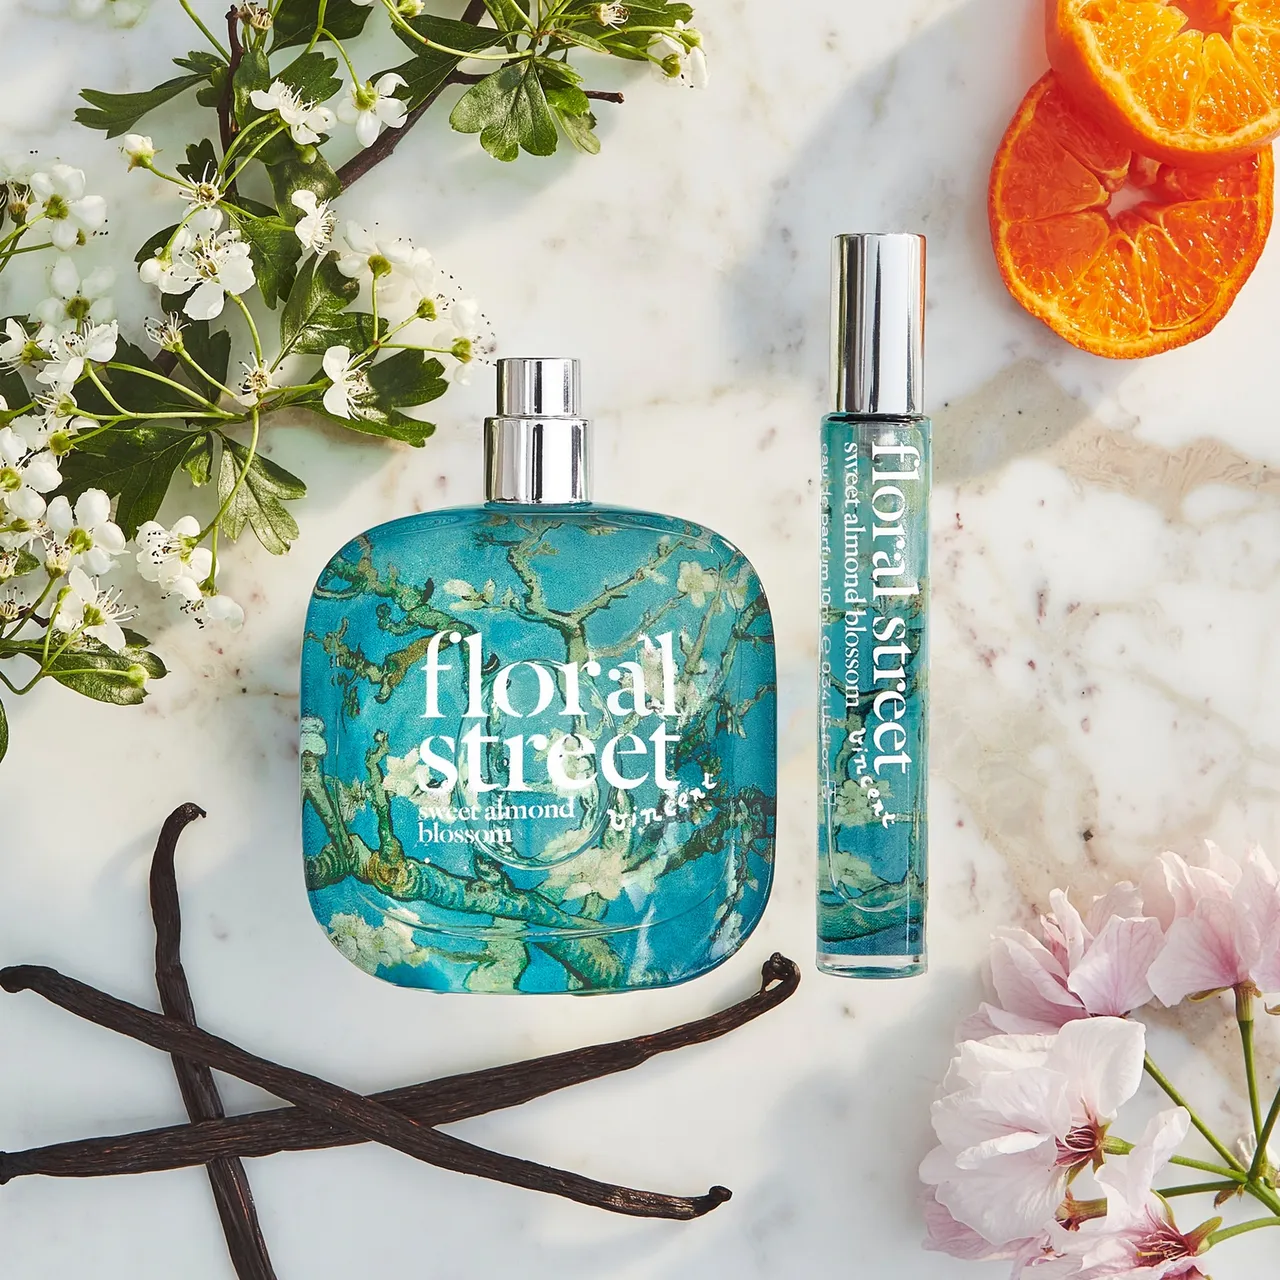 Floral Street Sweet Almond BlossomEDP Home and Away set